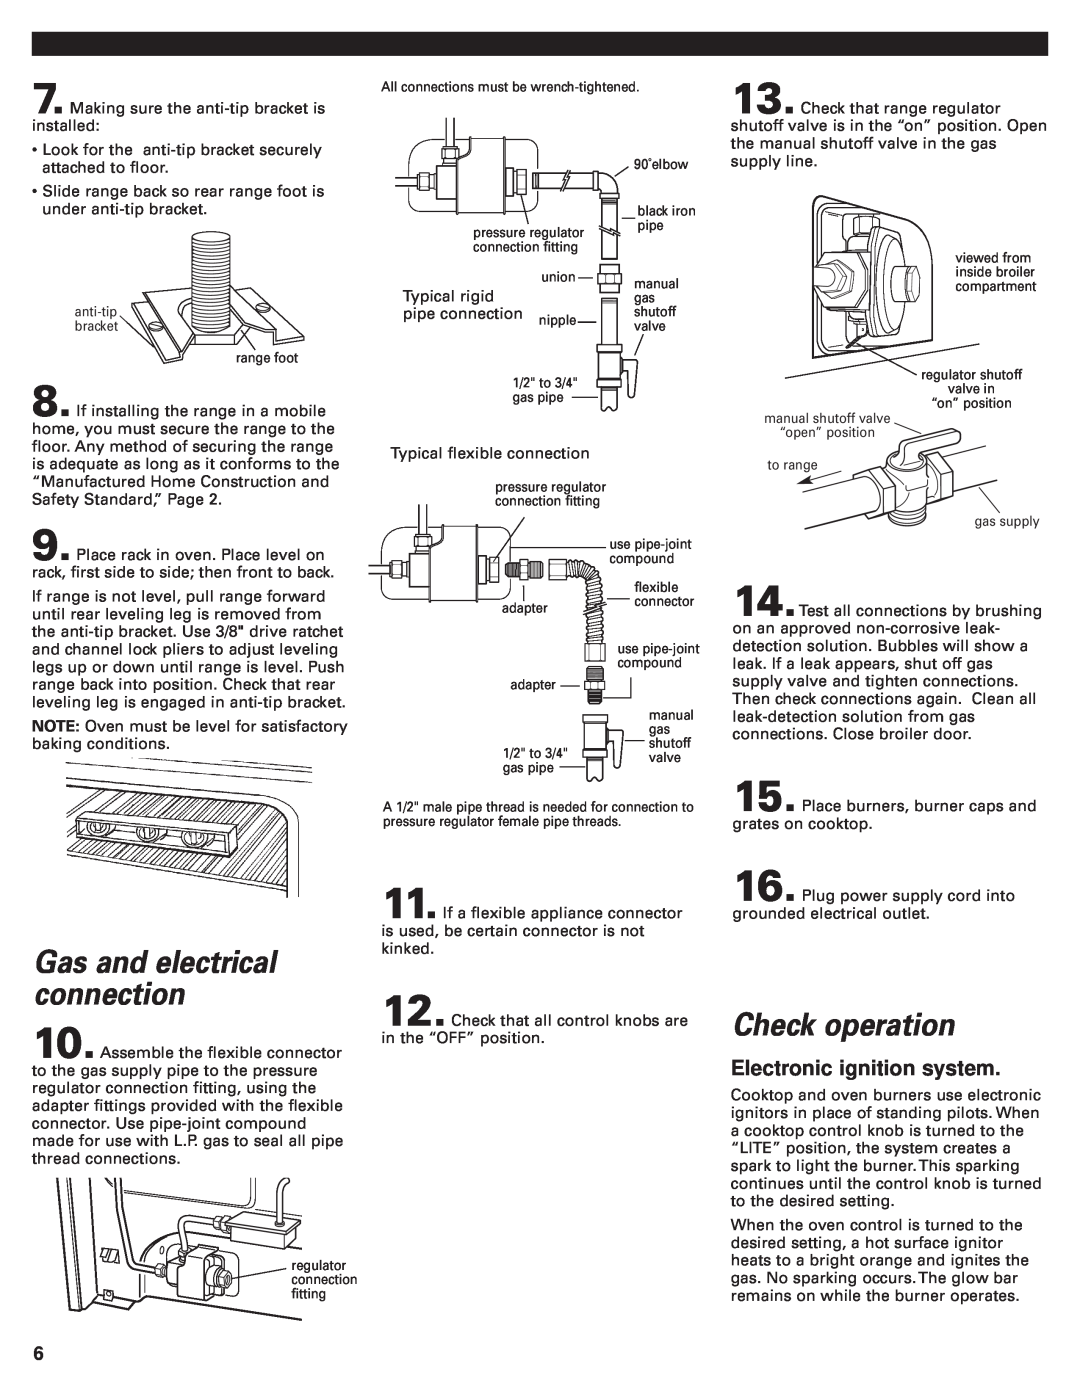 Whirlpool 98015194 installation instructions Check operation, Gas and electrical connection 